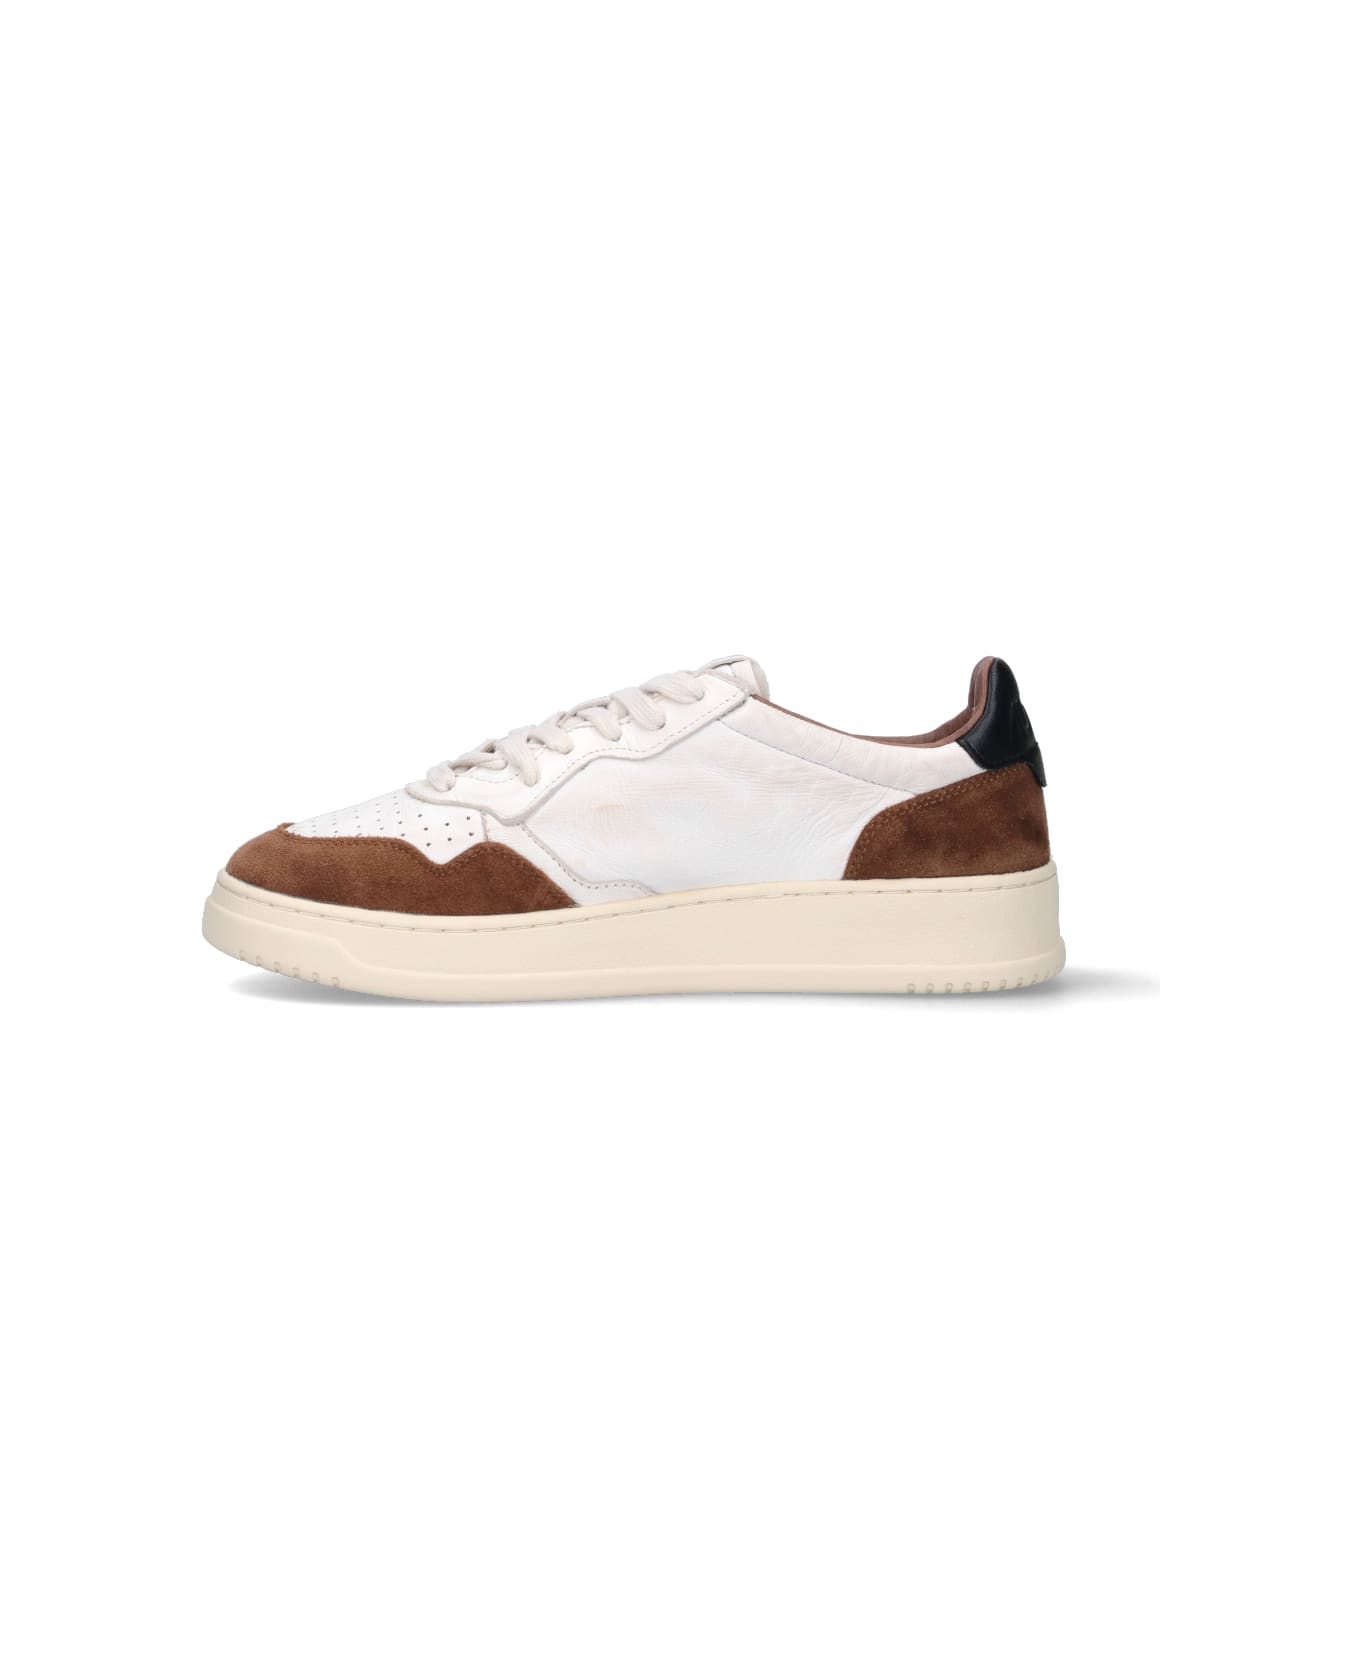 Autry Medalist Low Sneakers In Brown Suede And White Leather - White スニーカー